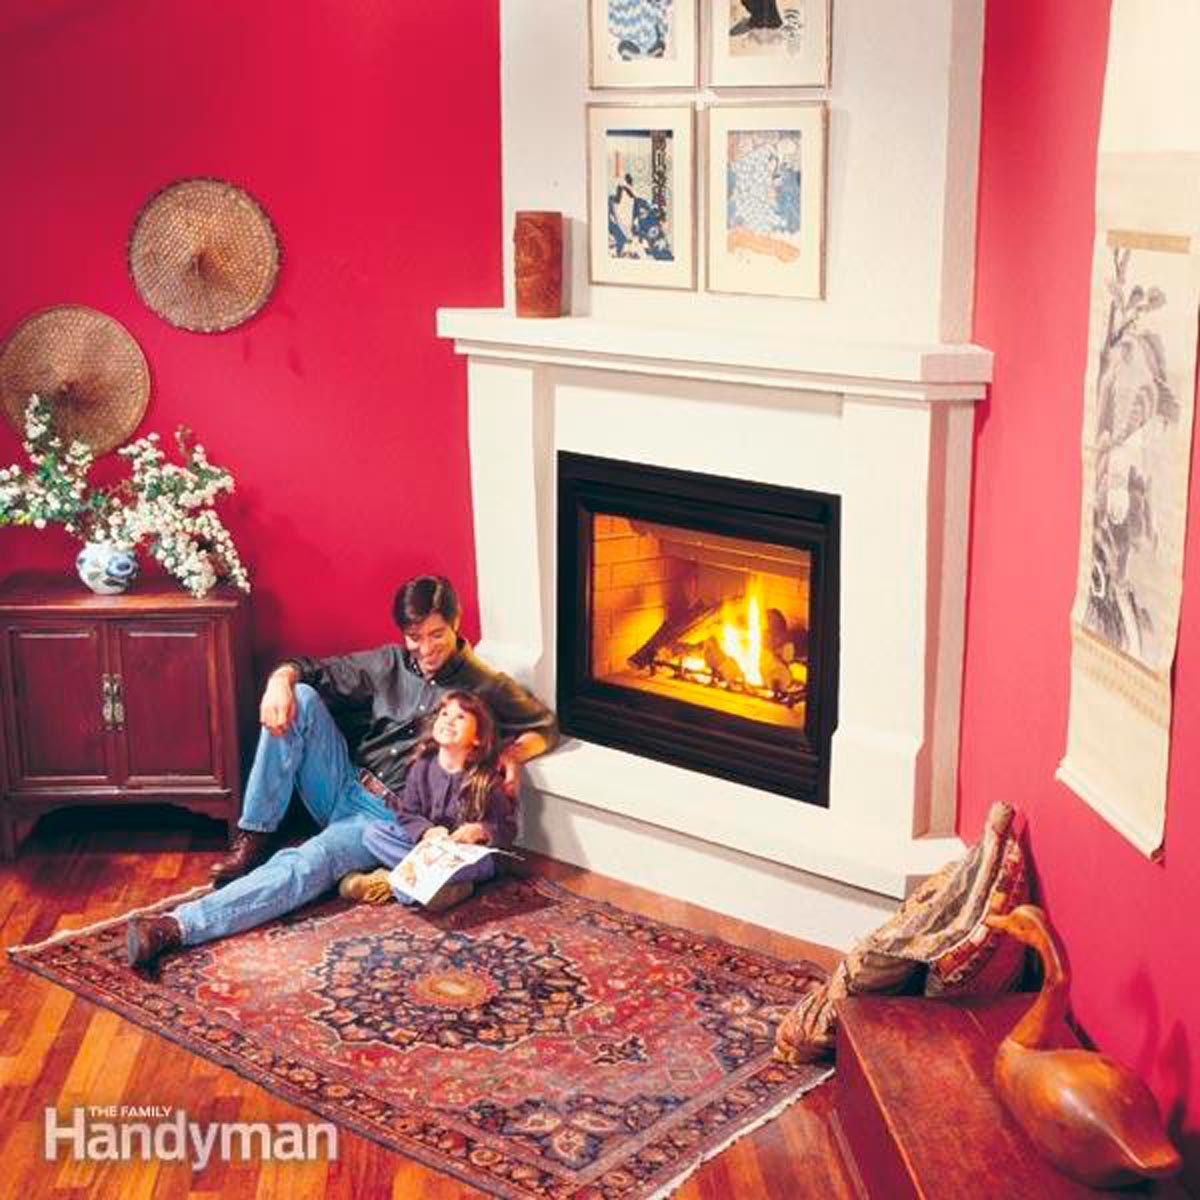 Download How To Install A Gas Fireplace Diy Built In Gas Fireplace